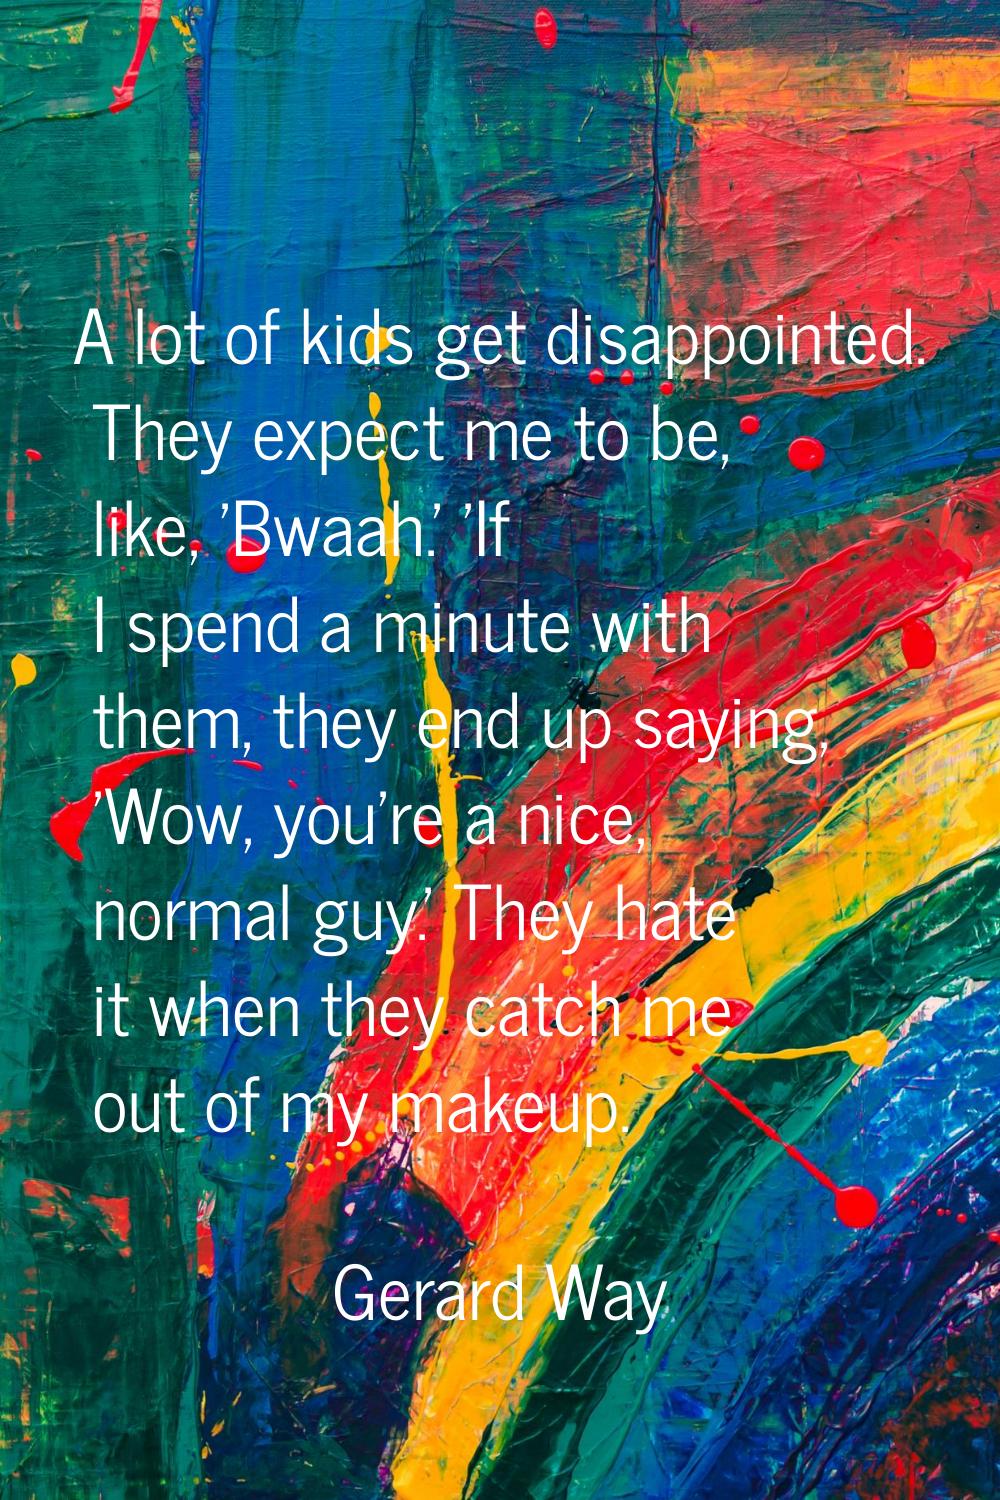 A lot of kids get disappointed. They expect me to be, like, 'Bwaah.' 'If I spend a minute with them